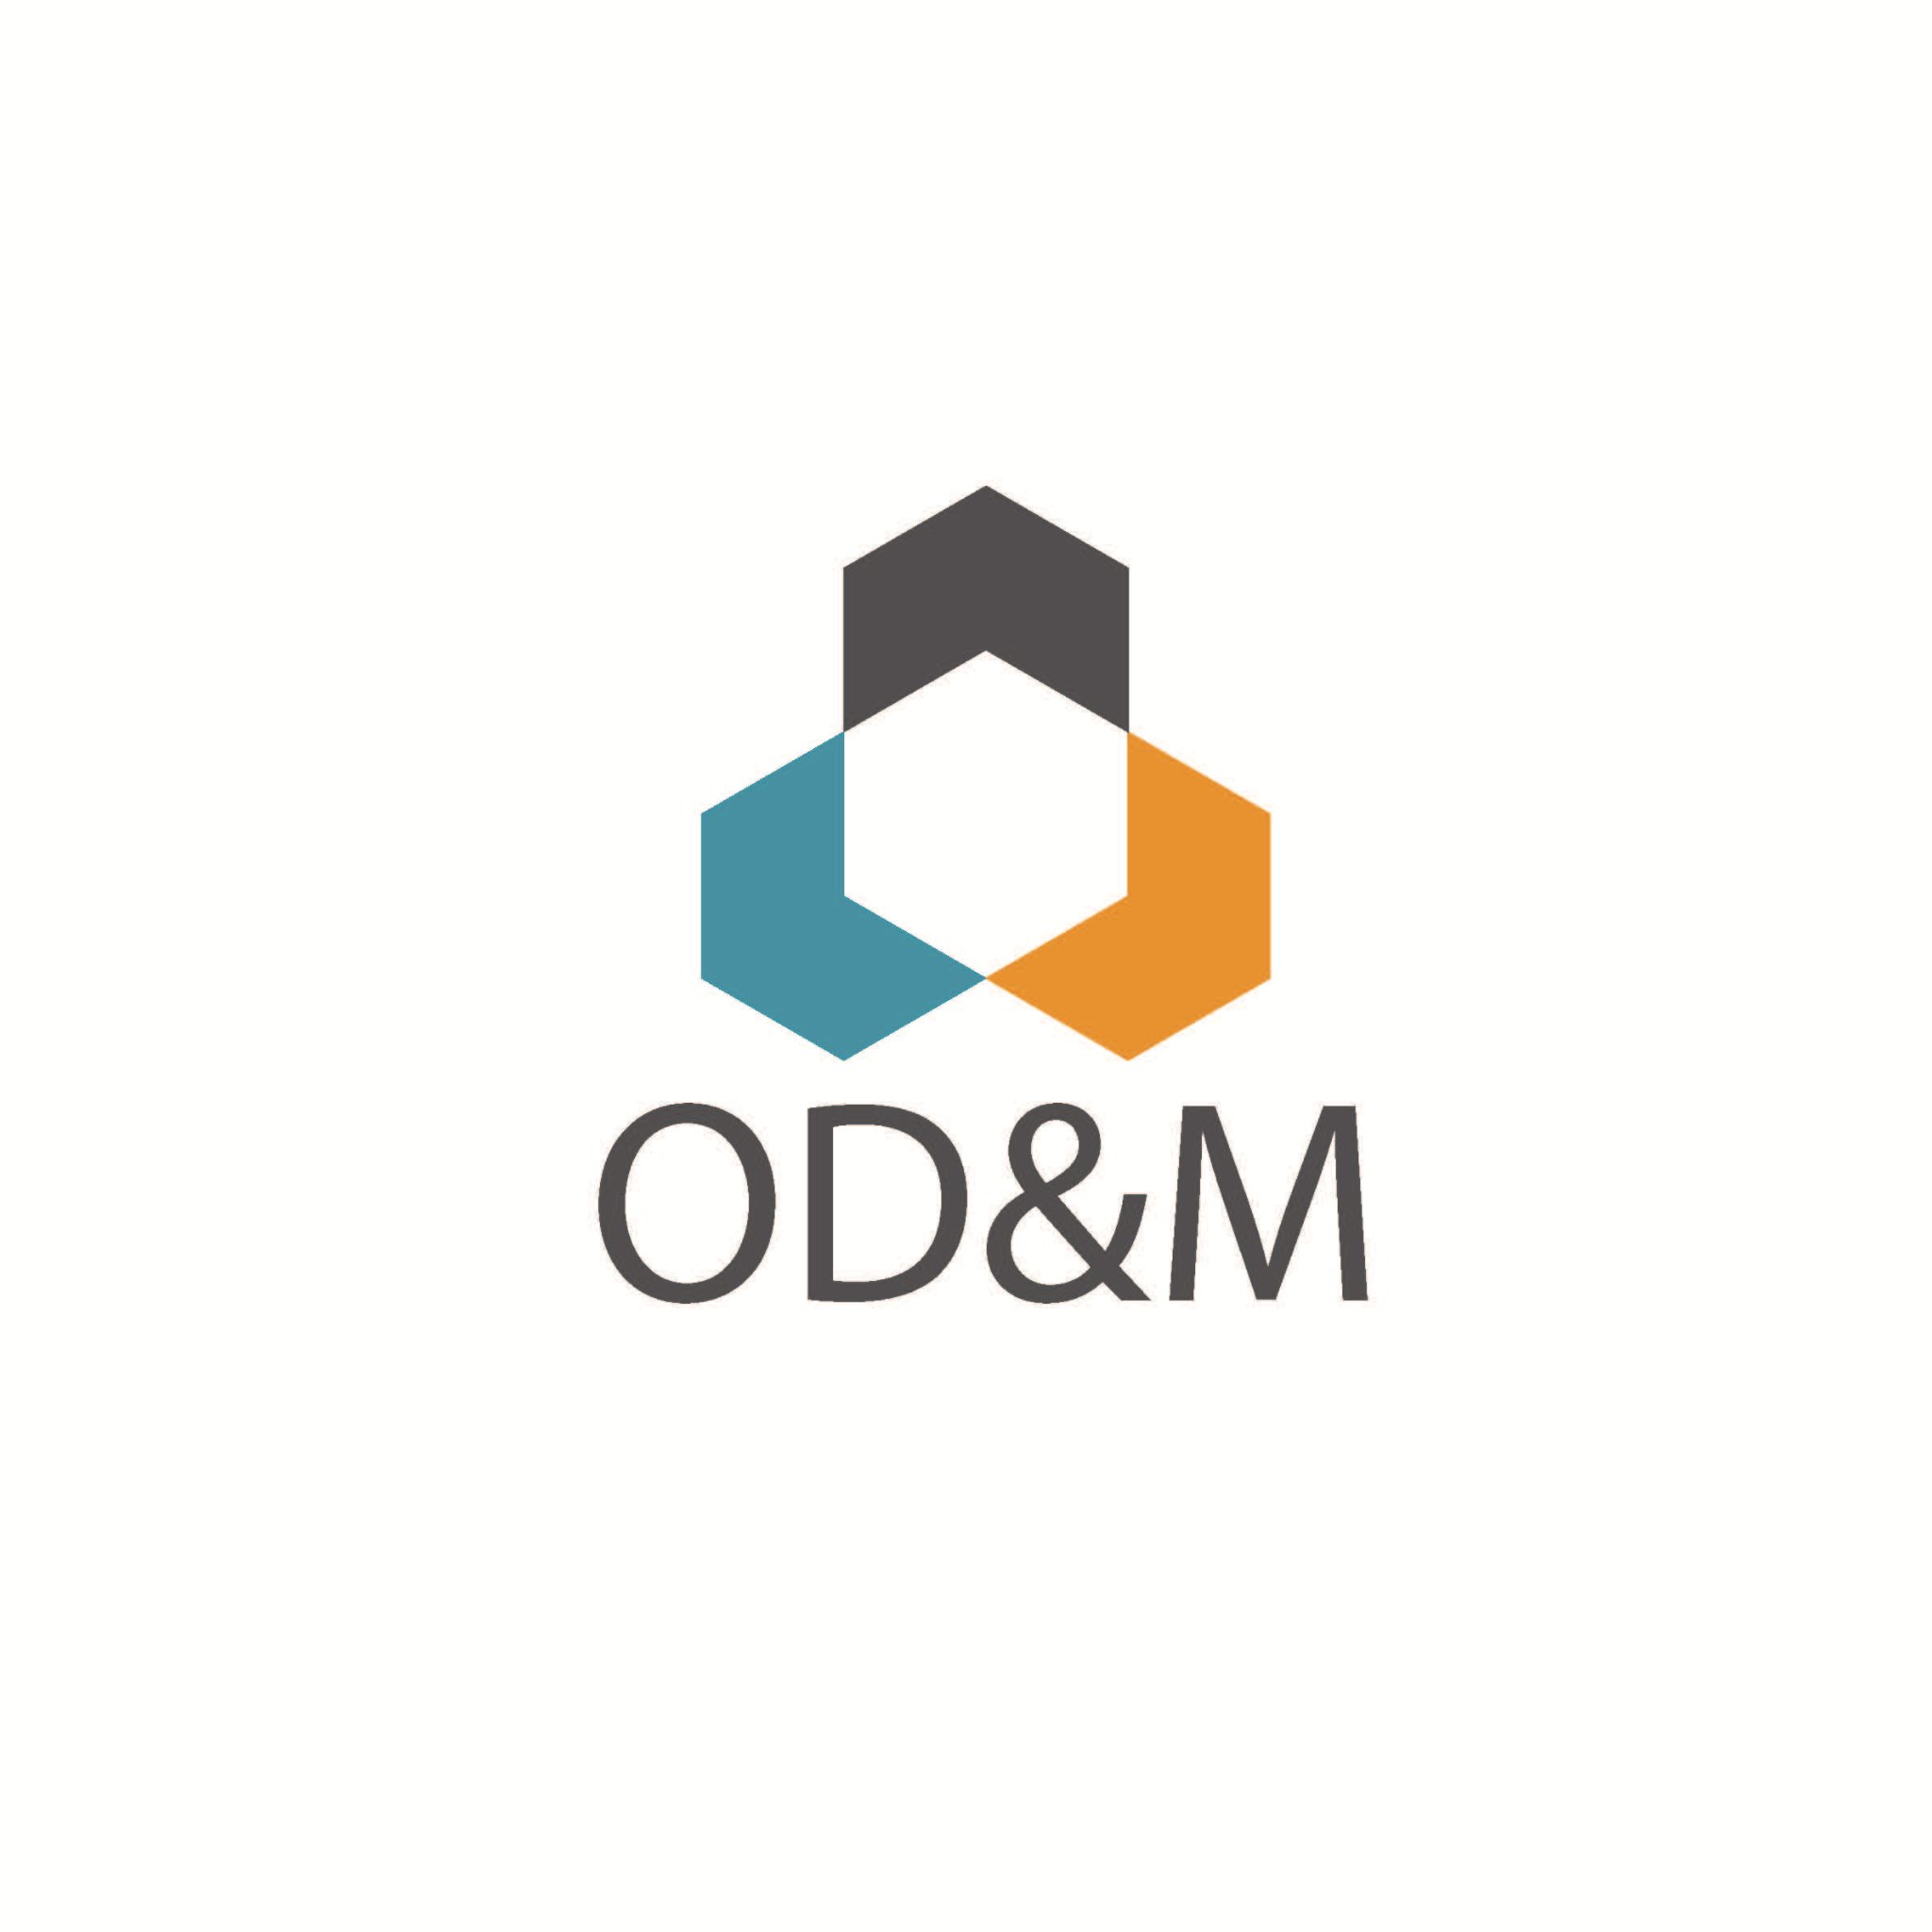 Open Design & Manufacturing (OD&M) is a EU funded Knowledge Alliance between HEIs, traditional manufacturers & innovation communities of digital-savvy makers.